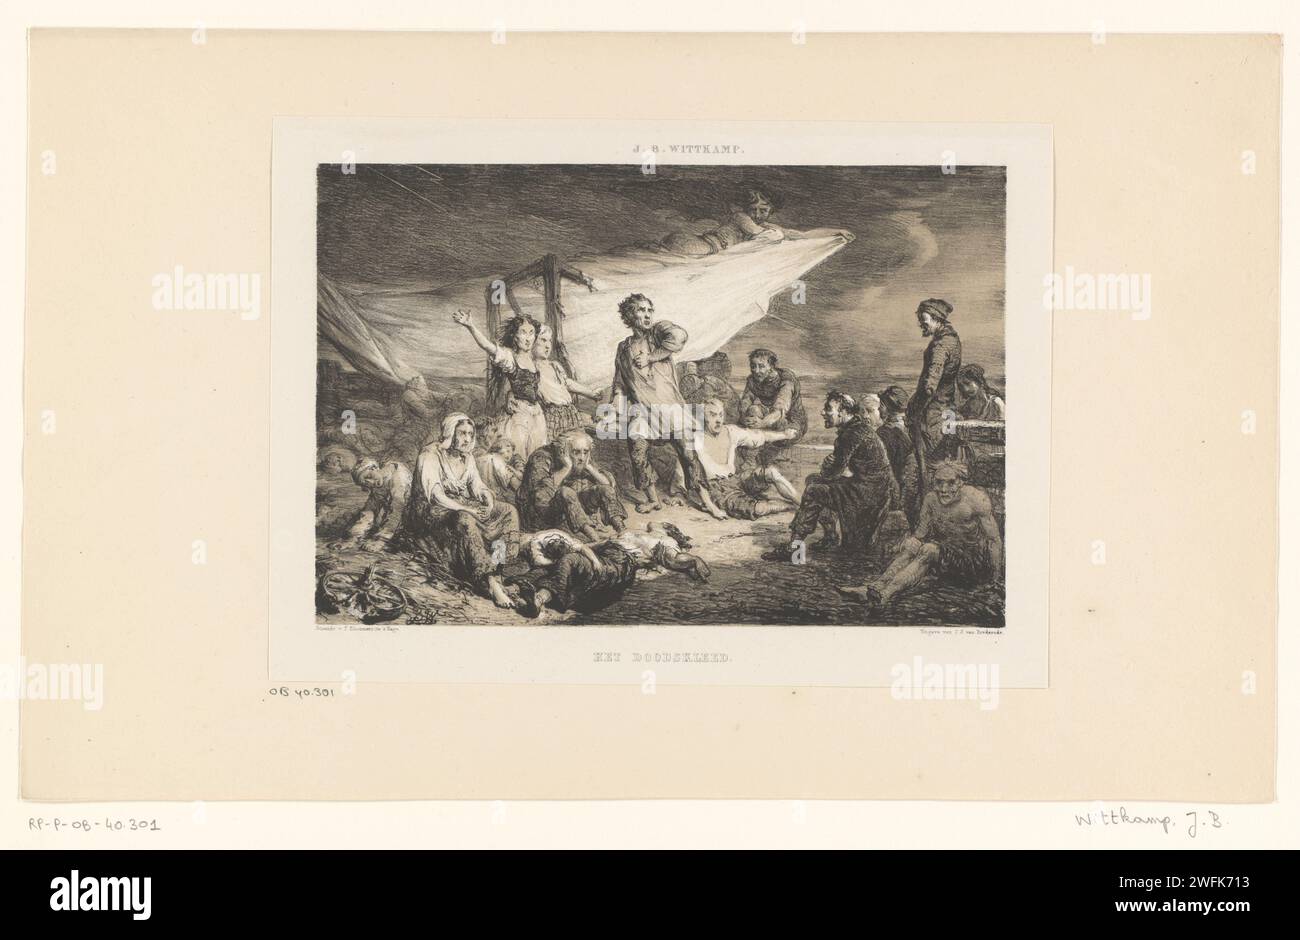 Devil above a group of dying, Johan Bernhard Wittkamp, 1847 - 1883 print A devil covers a group of people with a white death rug. The Hague paper  devil(s) and demons. death of human being Stock Photo